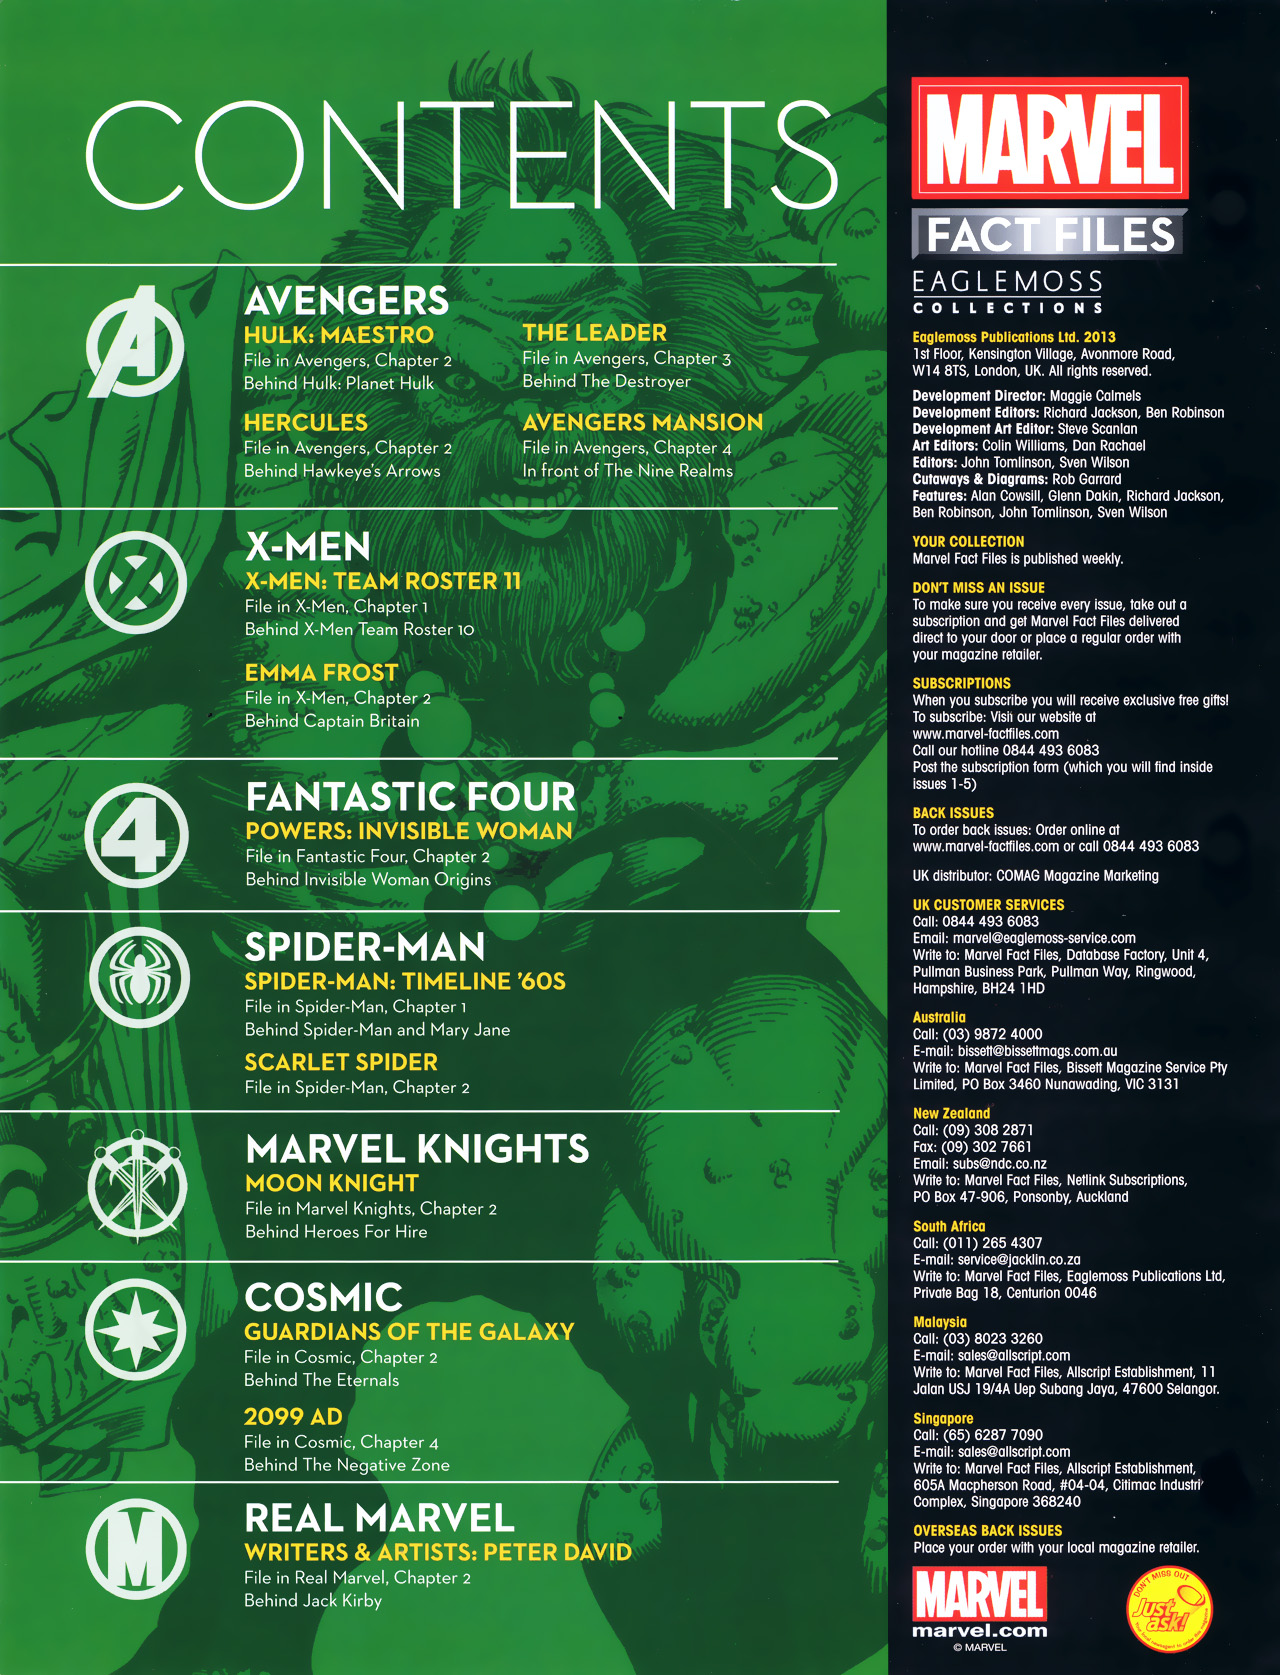 Read online Marvel Fact Files comic -  Issue #11 - 2